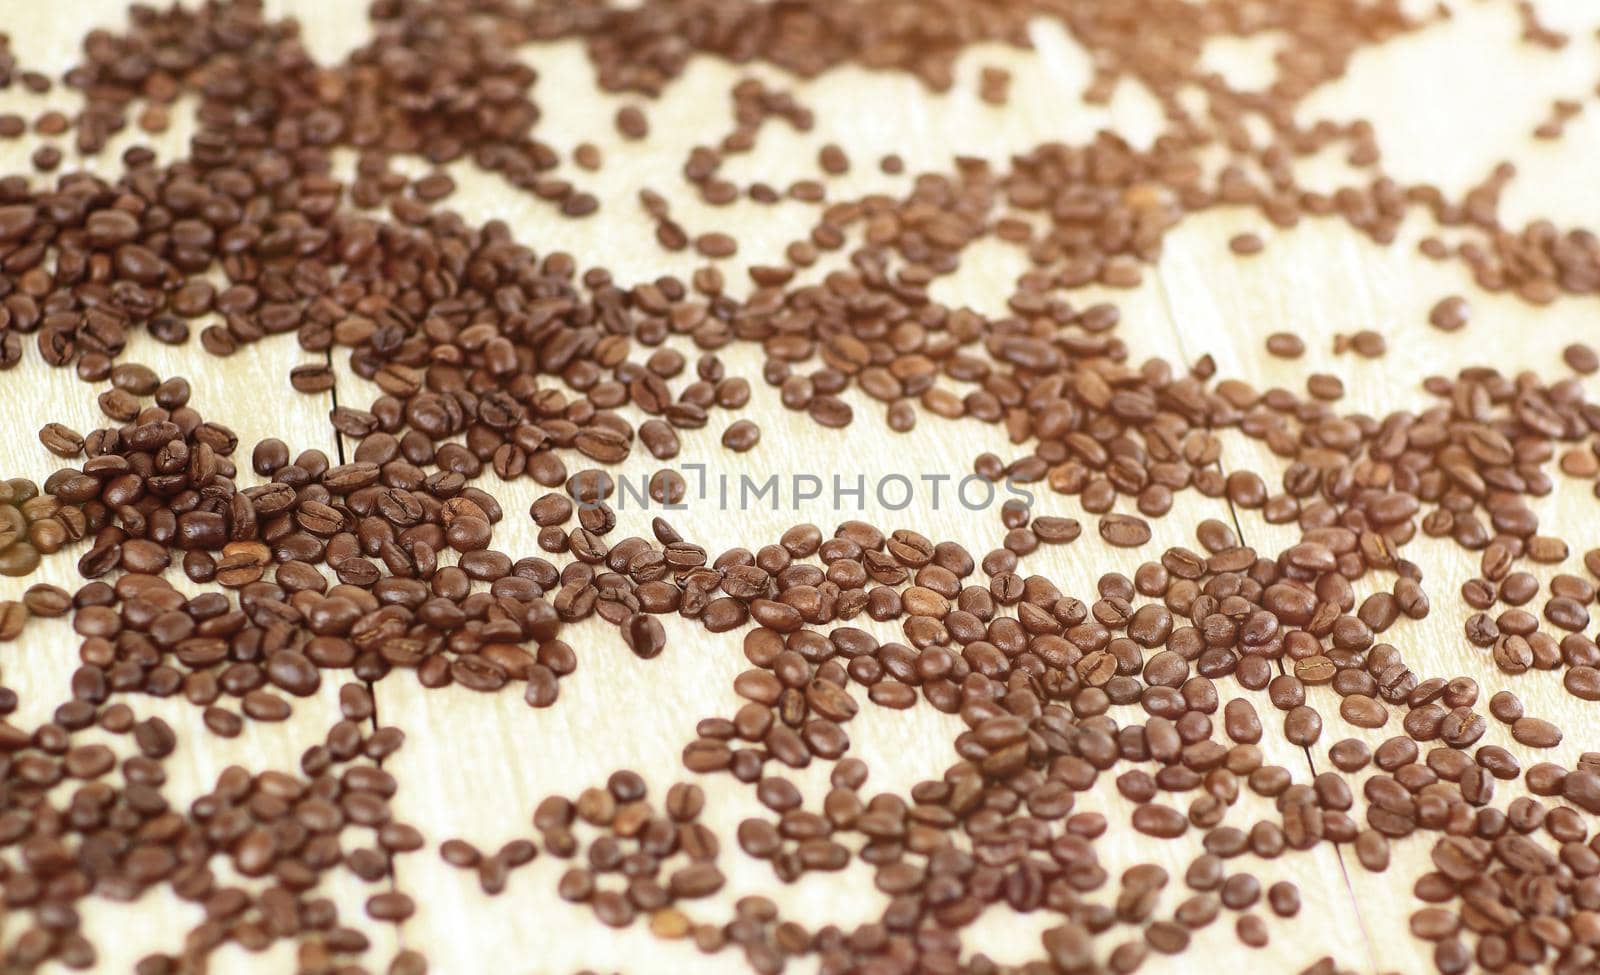 close-up of black coffee beans scattered on a wooden table.background.